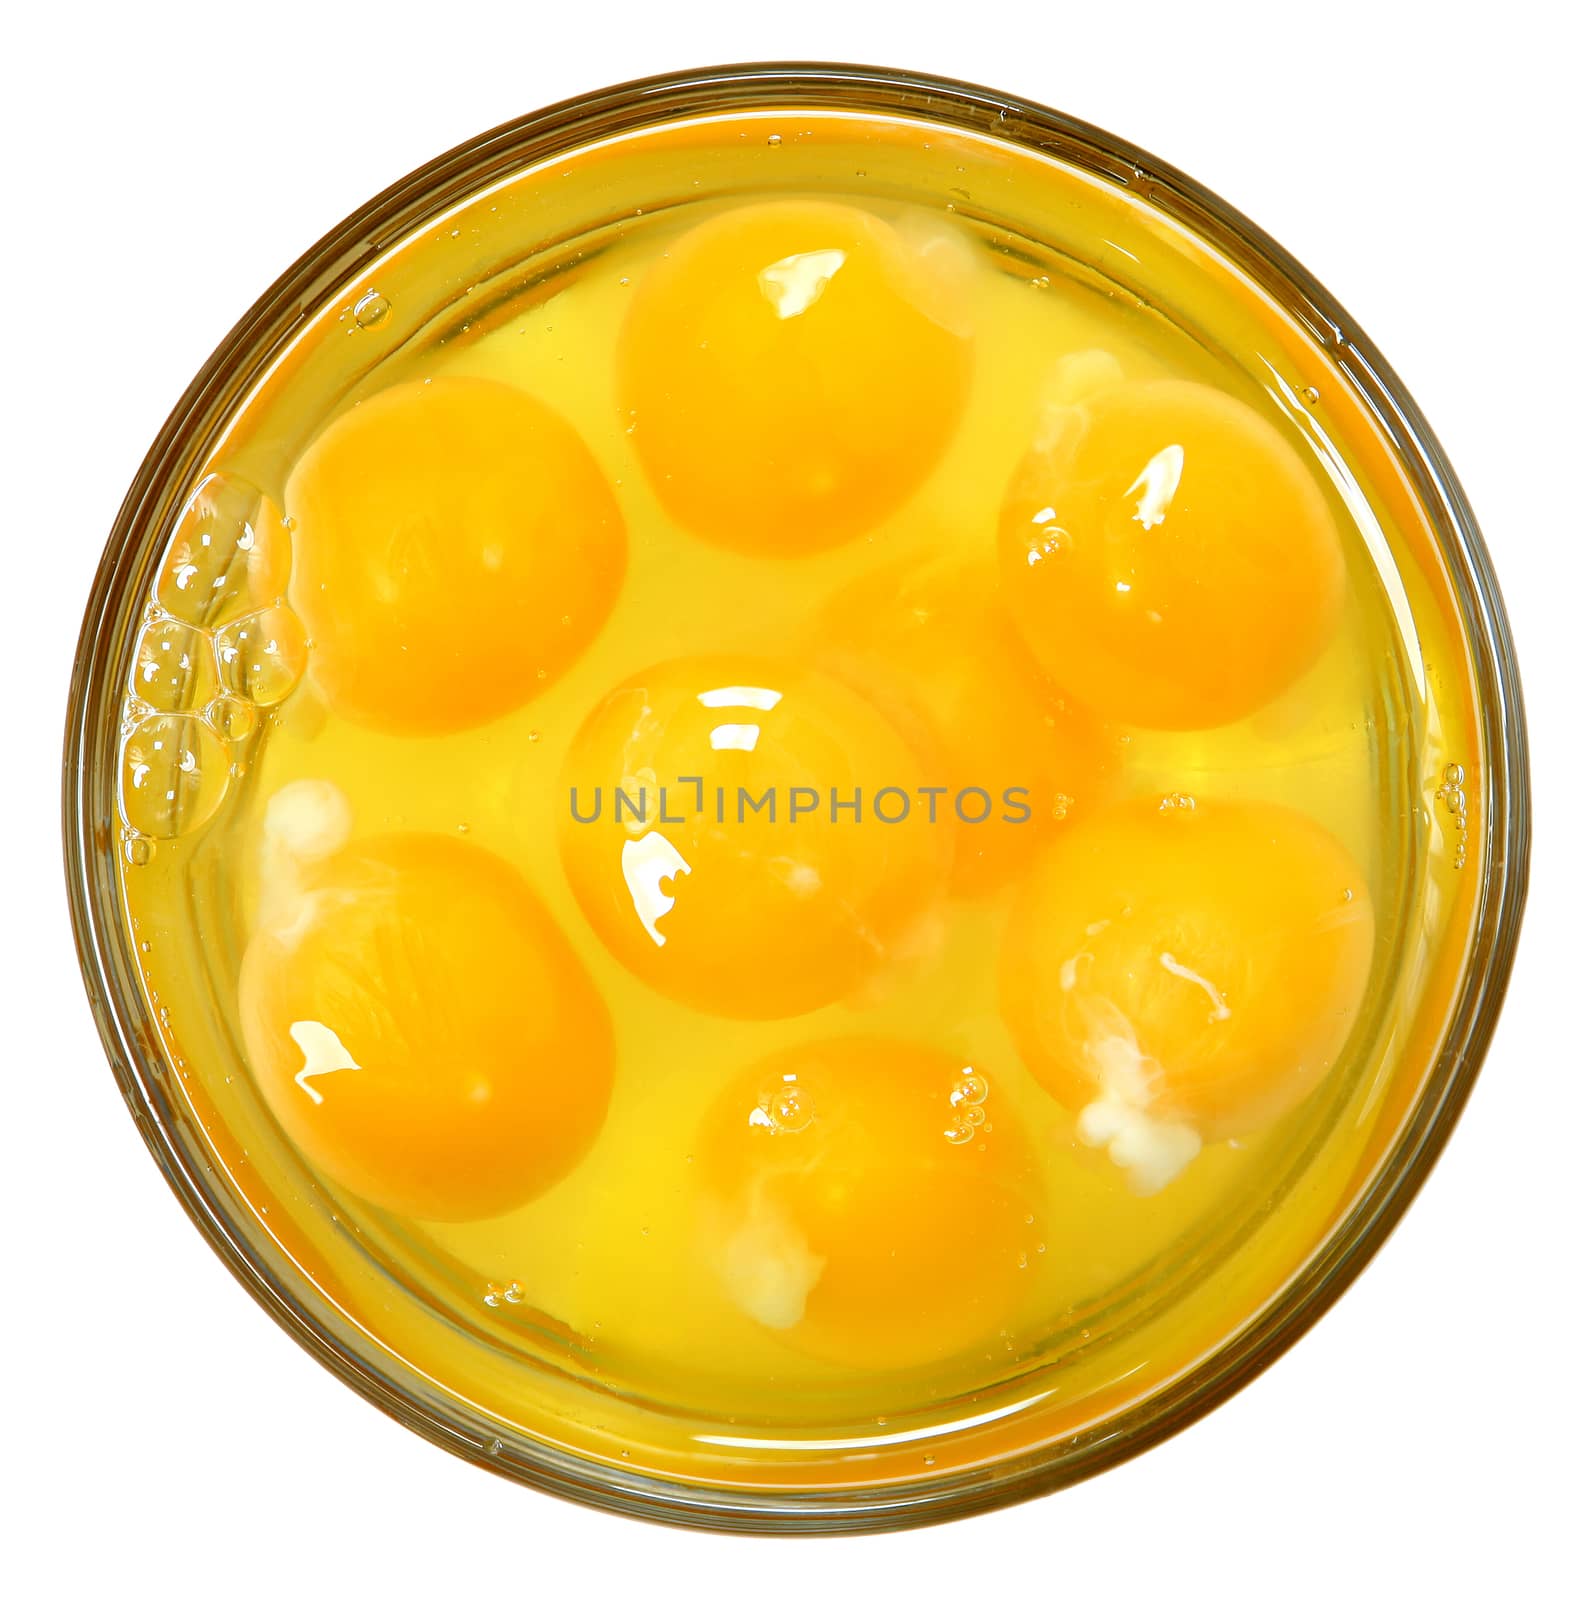 Raw Eggs in Glass Bowl Over White by duplass